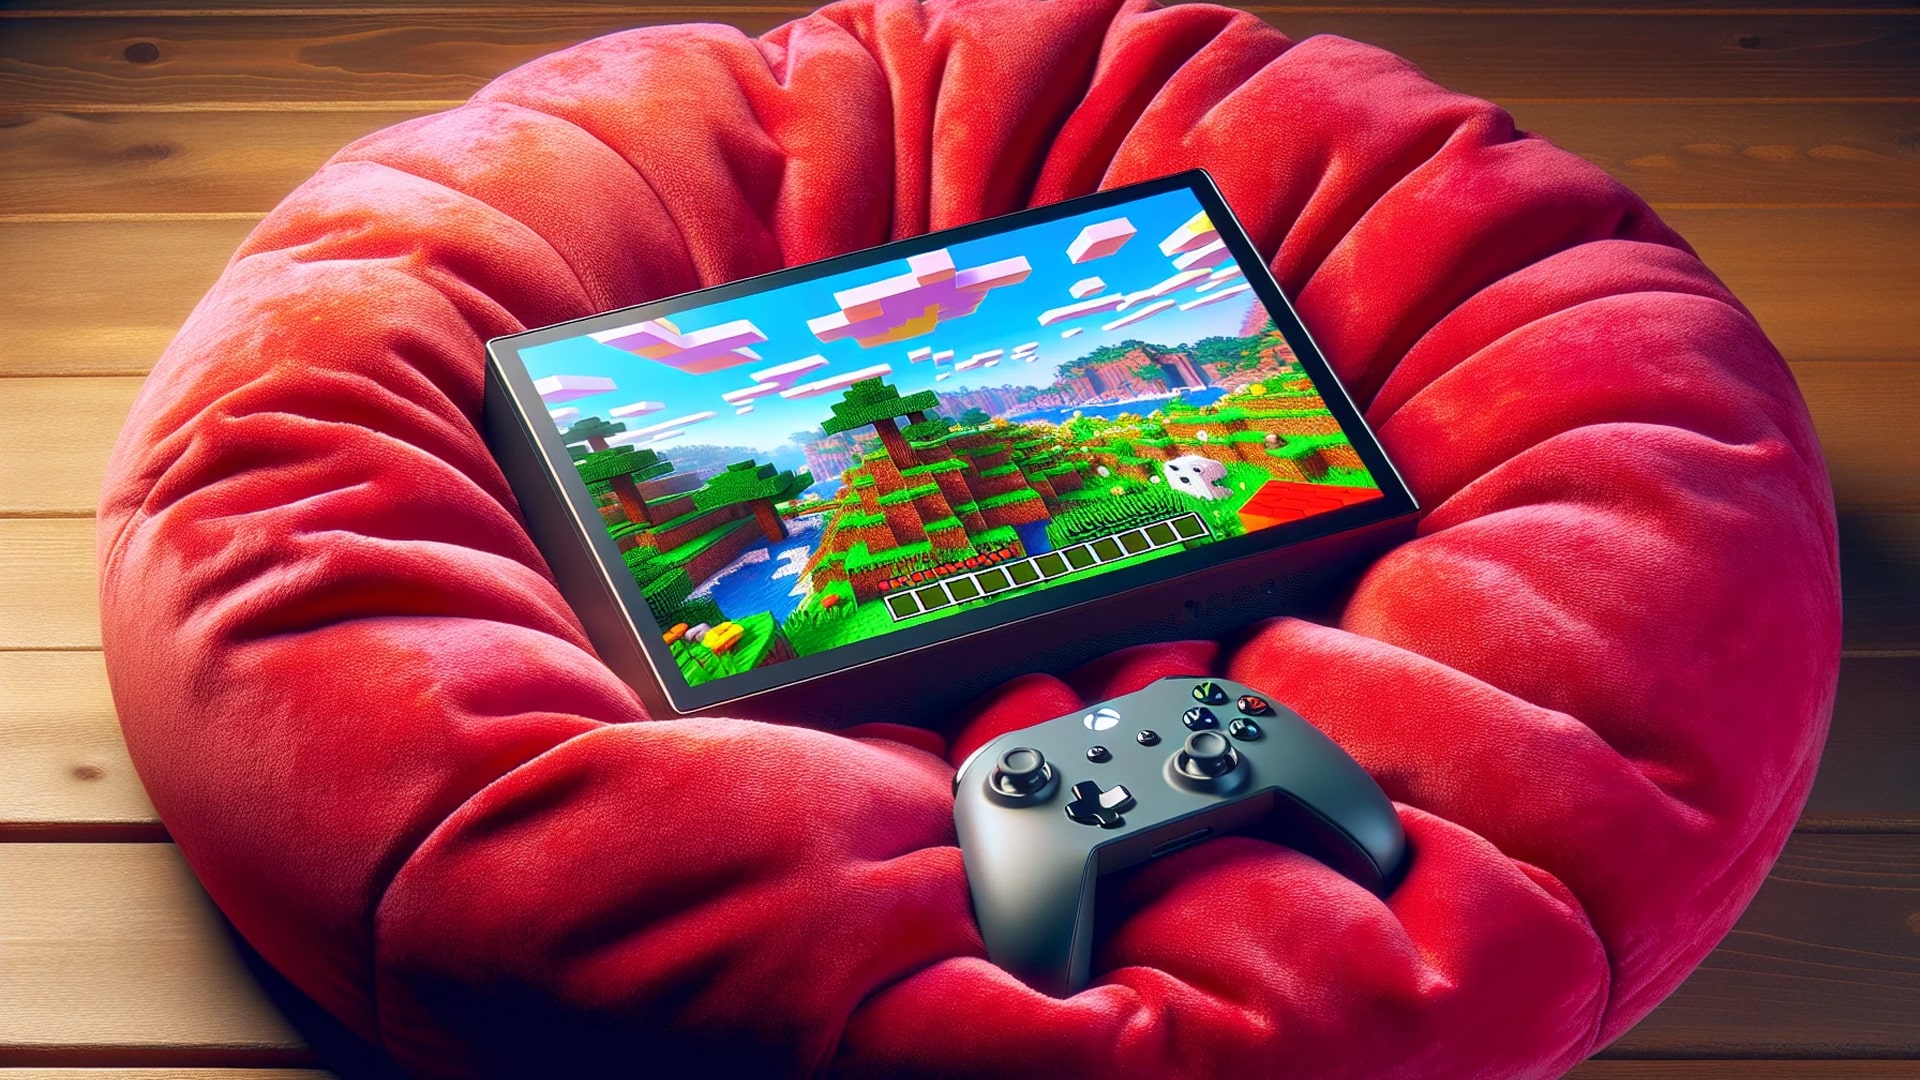 Nintendo Switch console with Minecraft game displayed on the screen